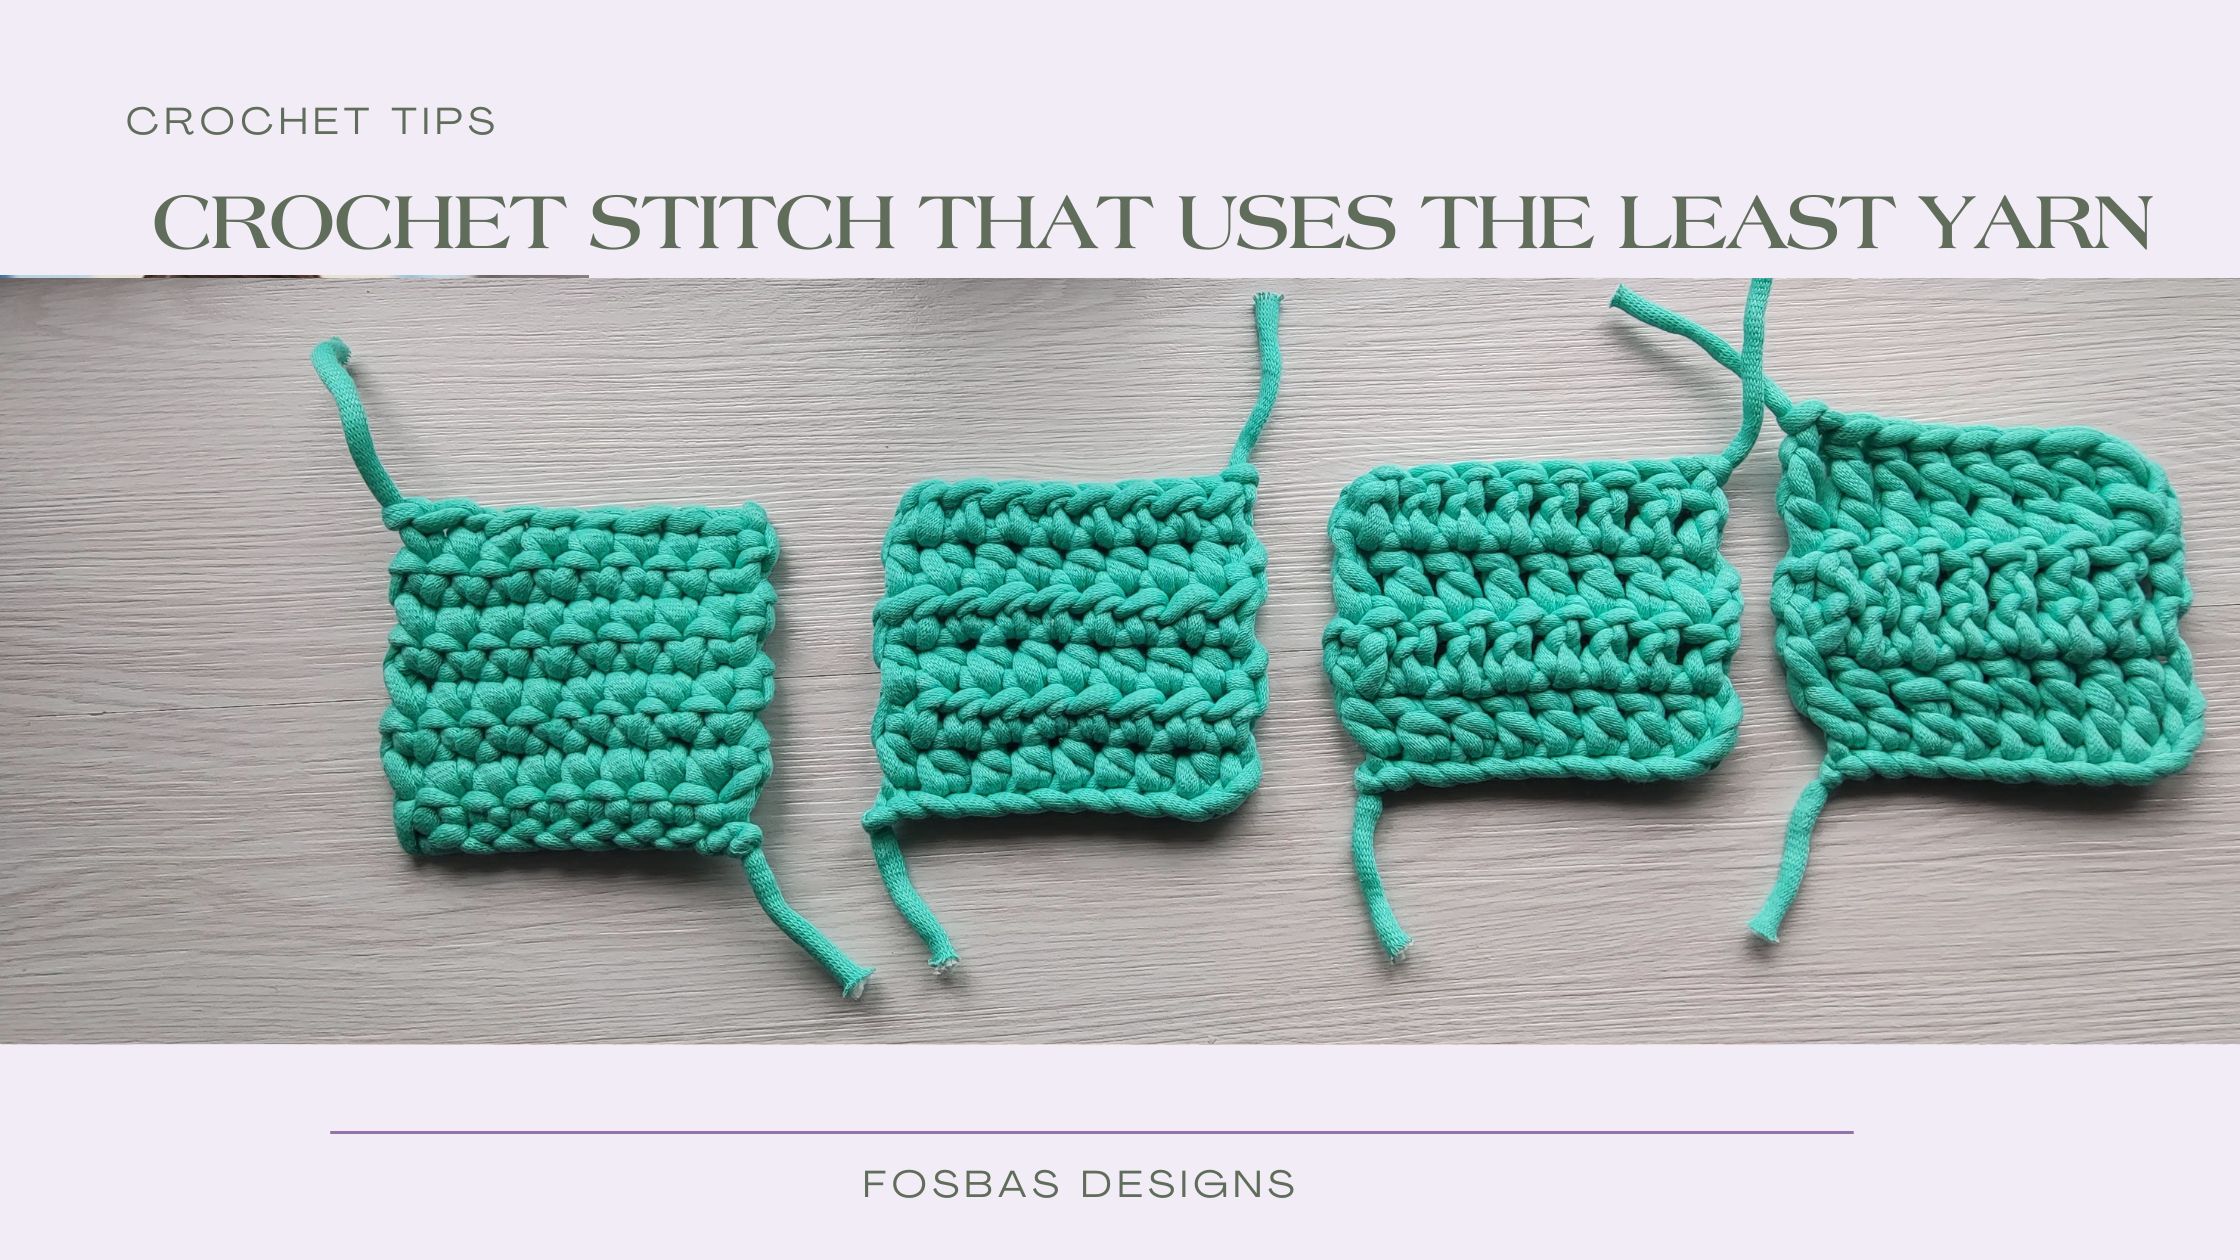 What Crochet Stitch Uses the Least Yarn